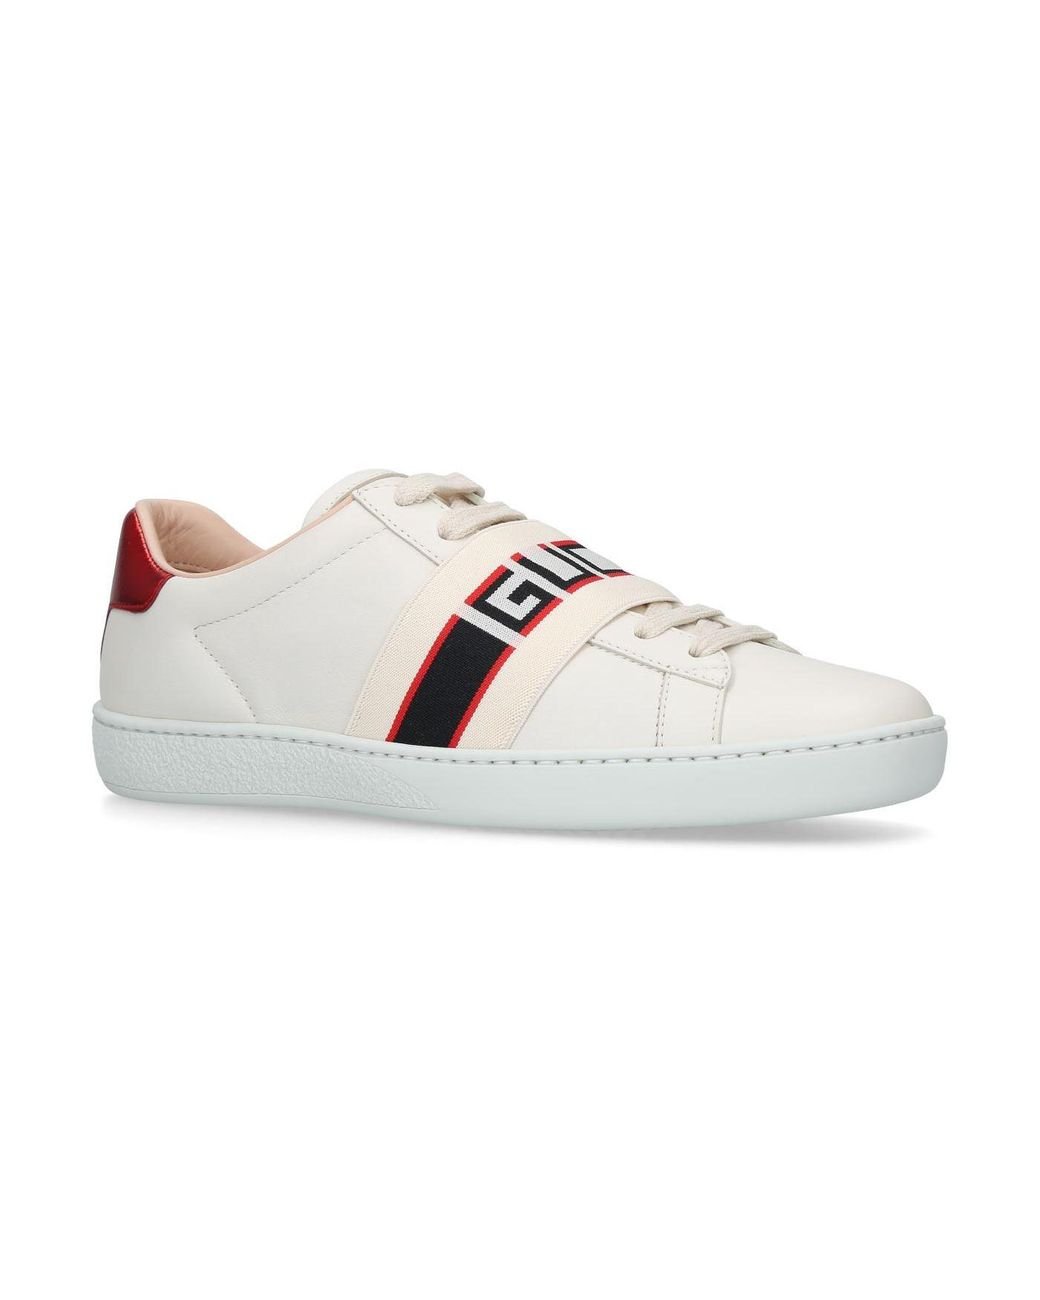 Gucci Ace Elastic Band Sneakers in White | Lyst